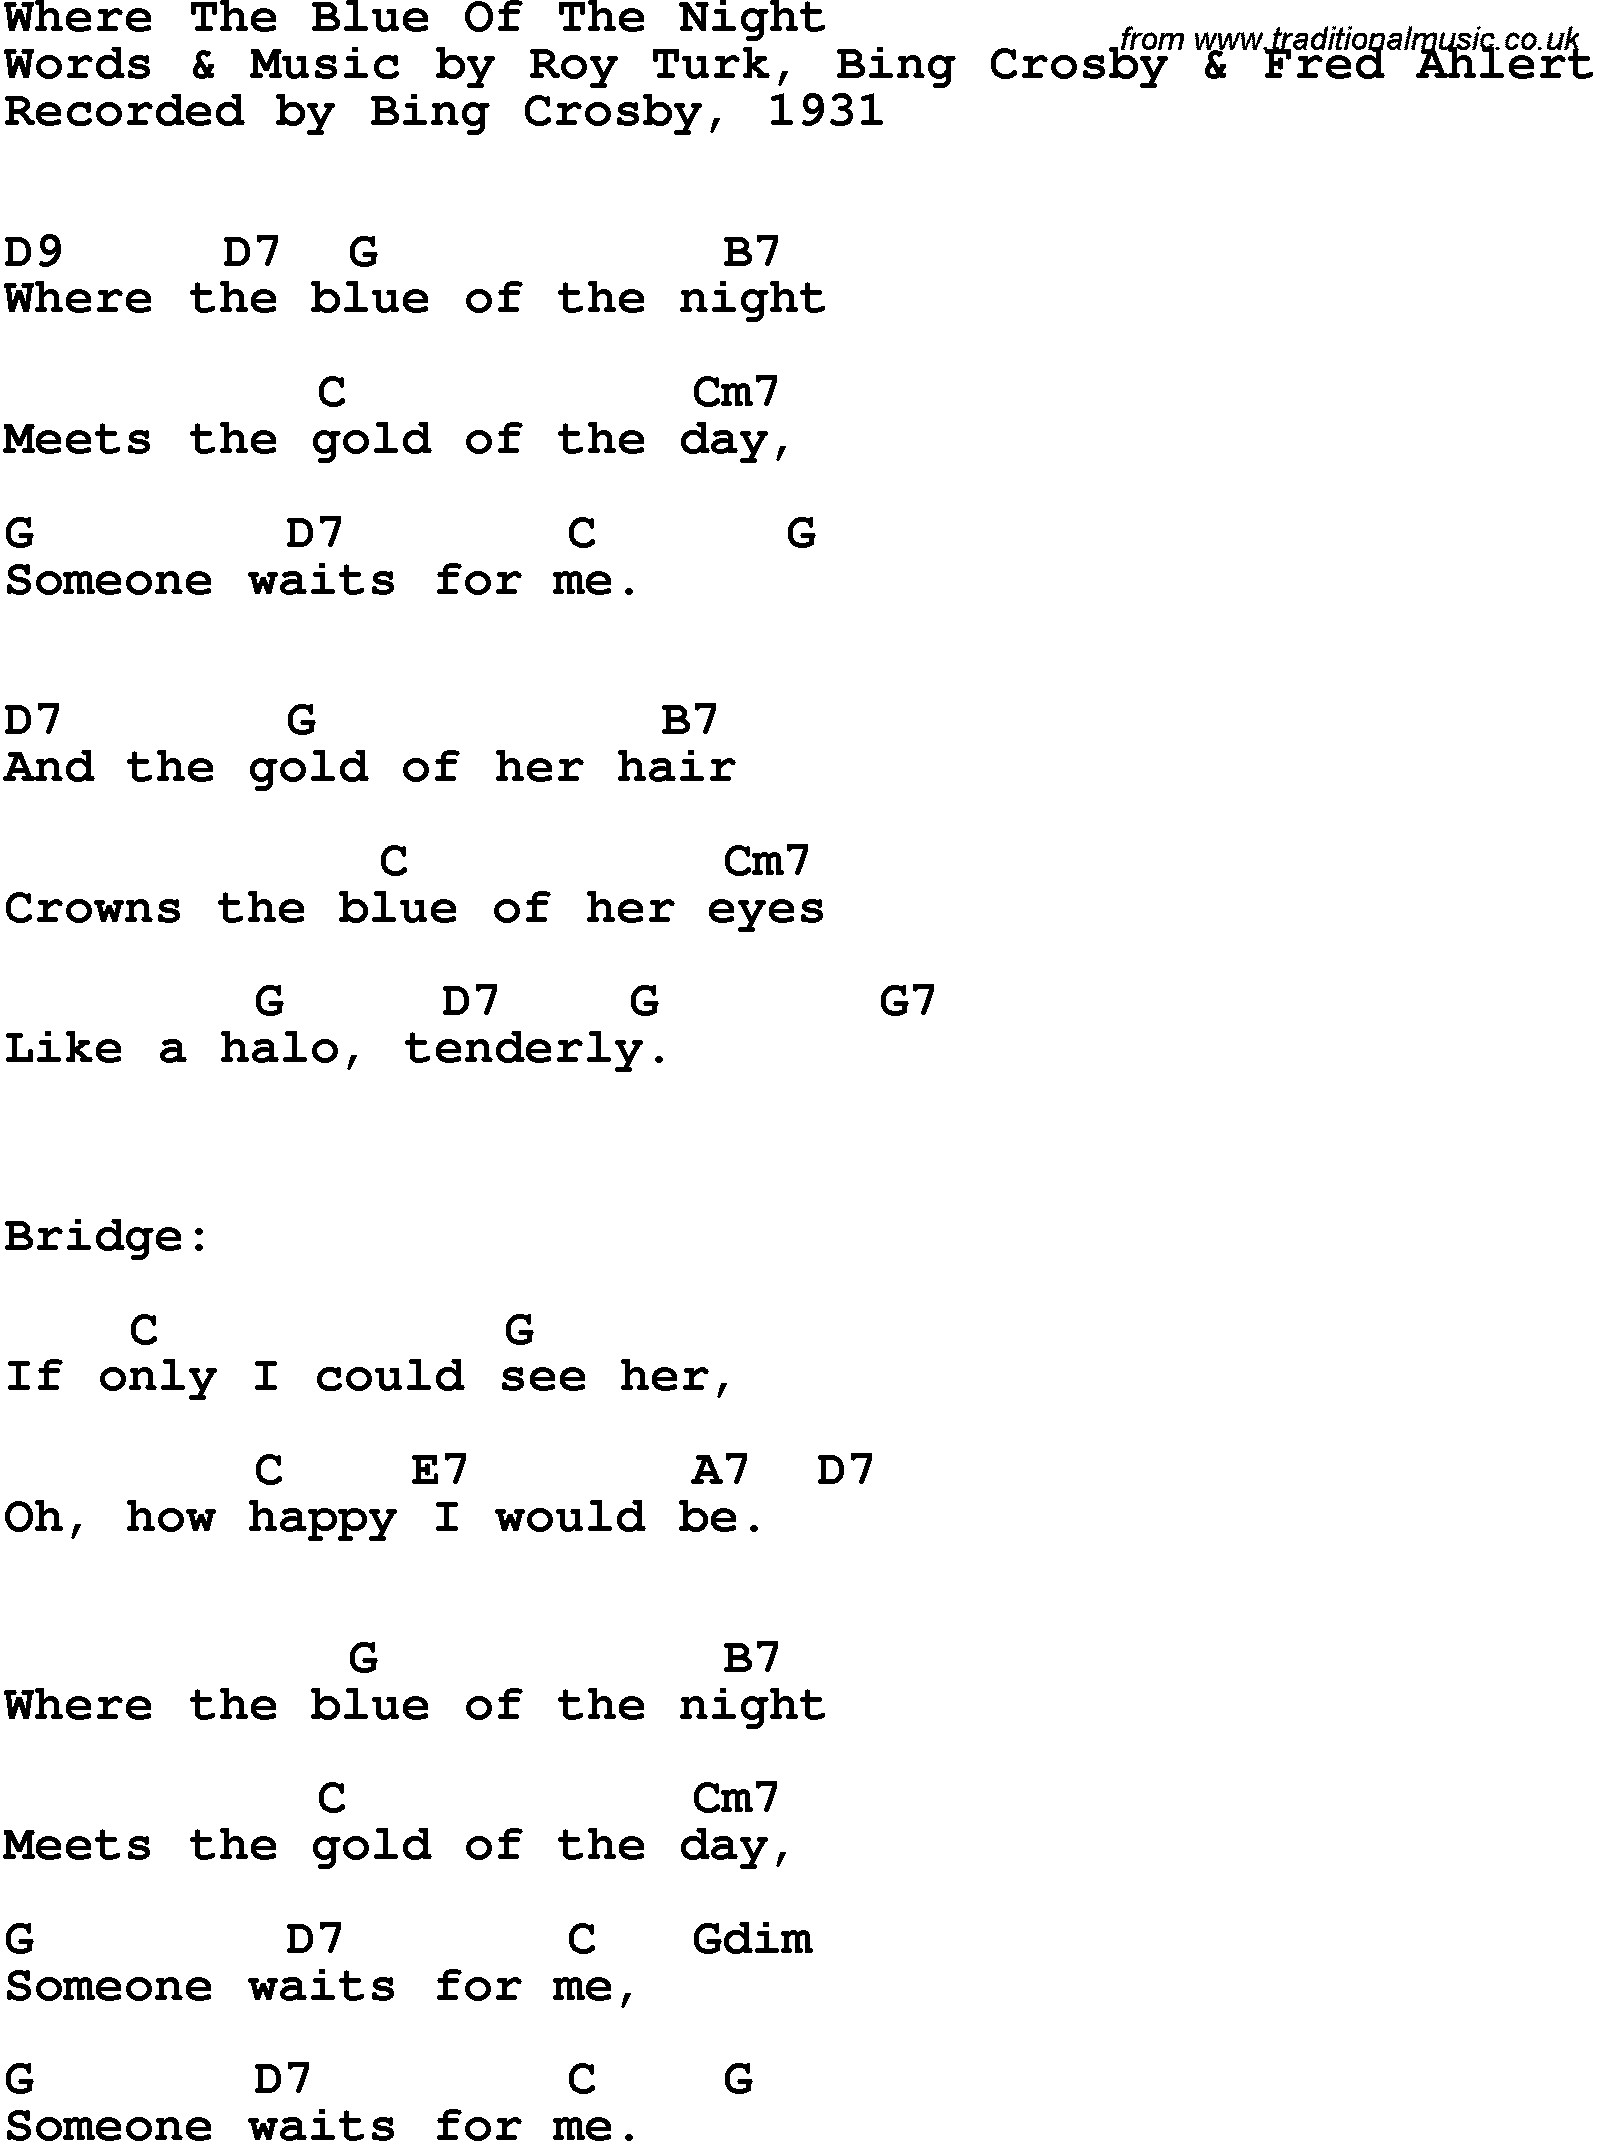 Song Lyrics with guitar chords for Where The Blue Of The Night - Bing Crosby, 1931